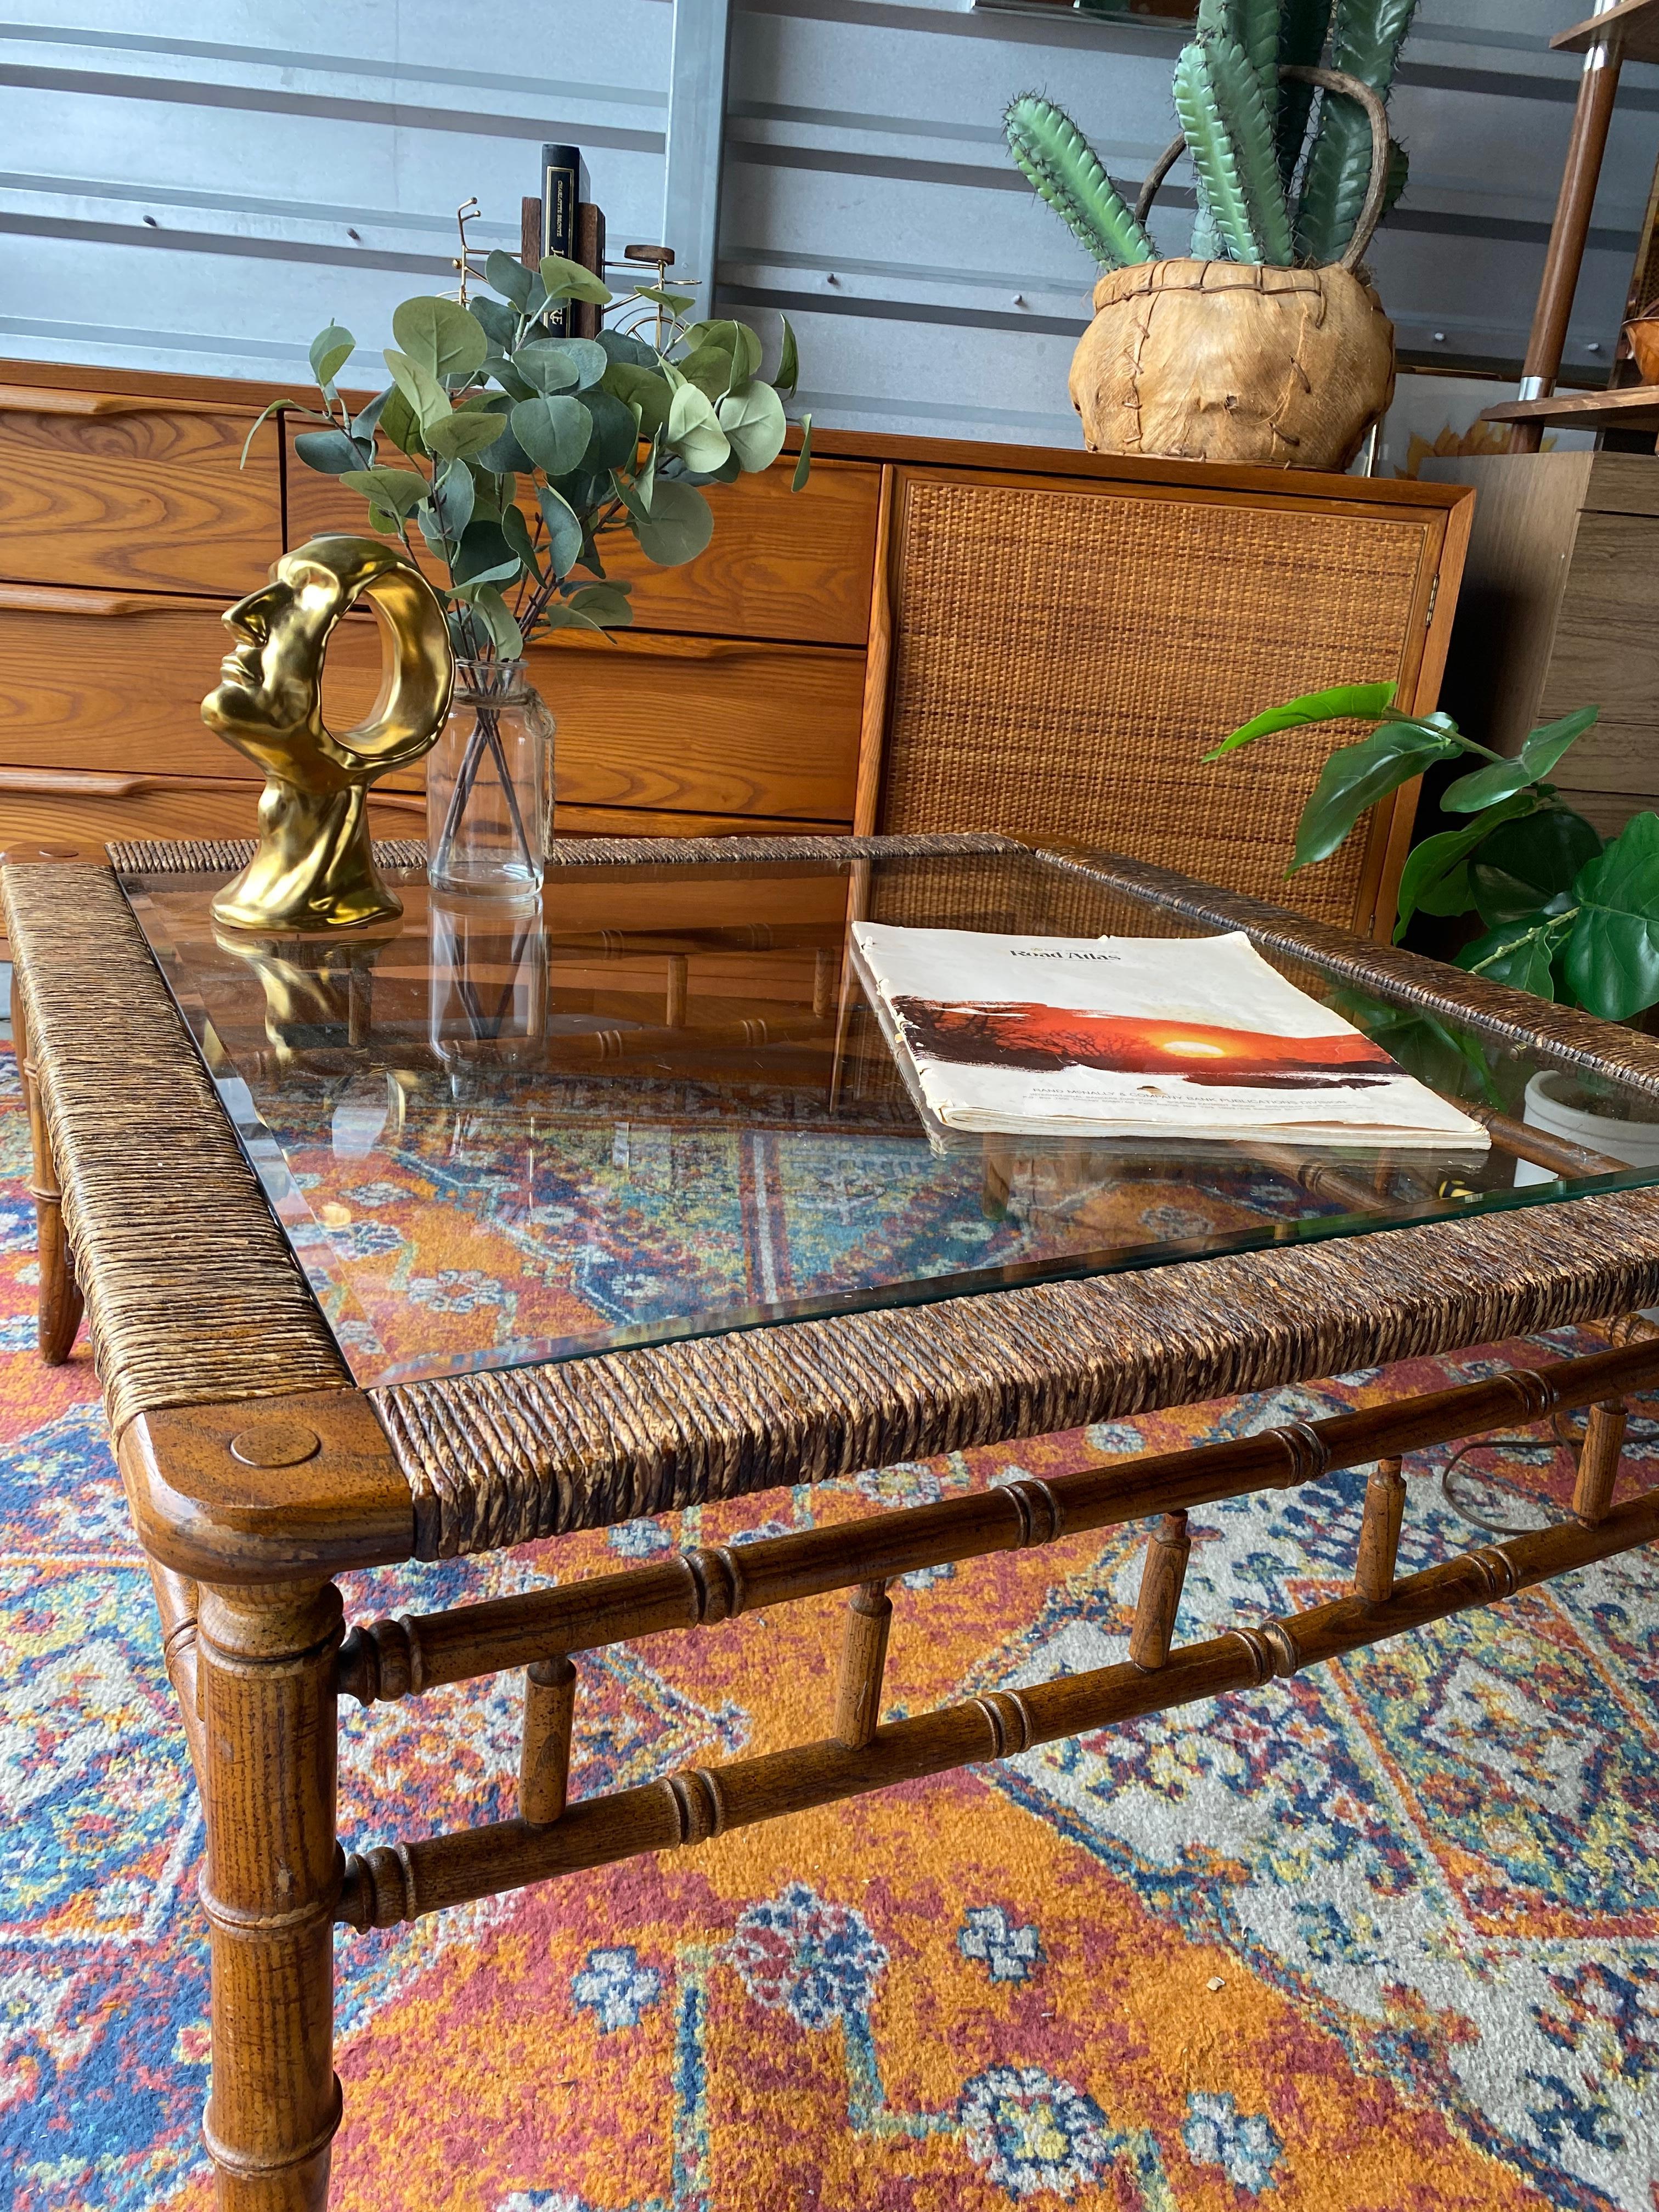 Beautiful midcentury vintage coffee table. Such a spectacular piece to add to your living space.